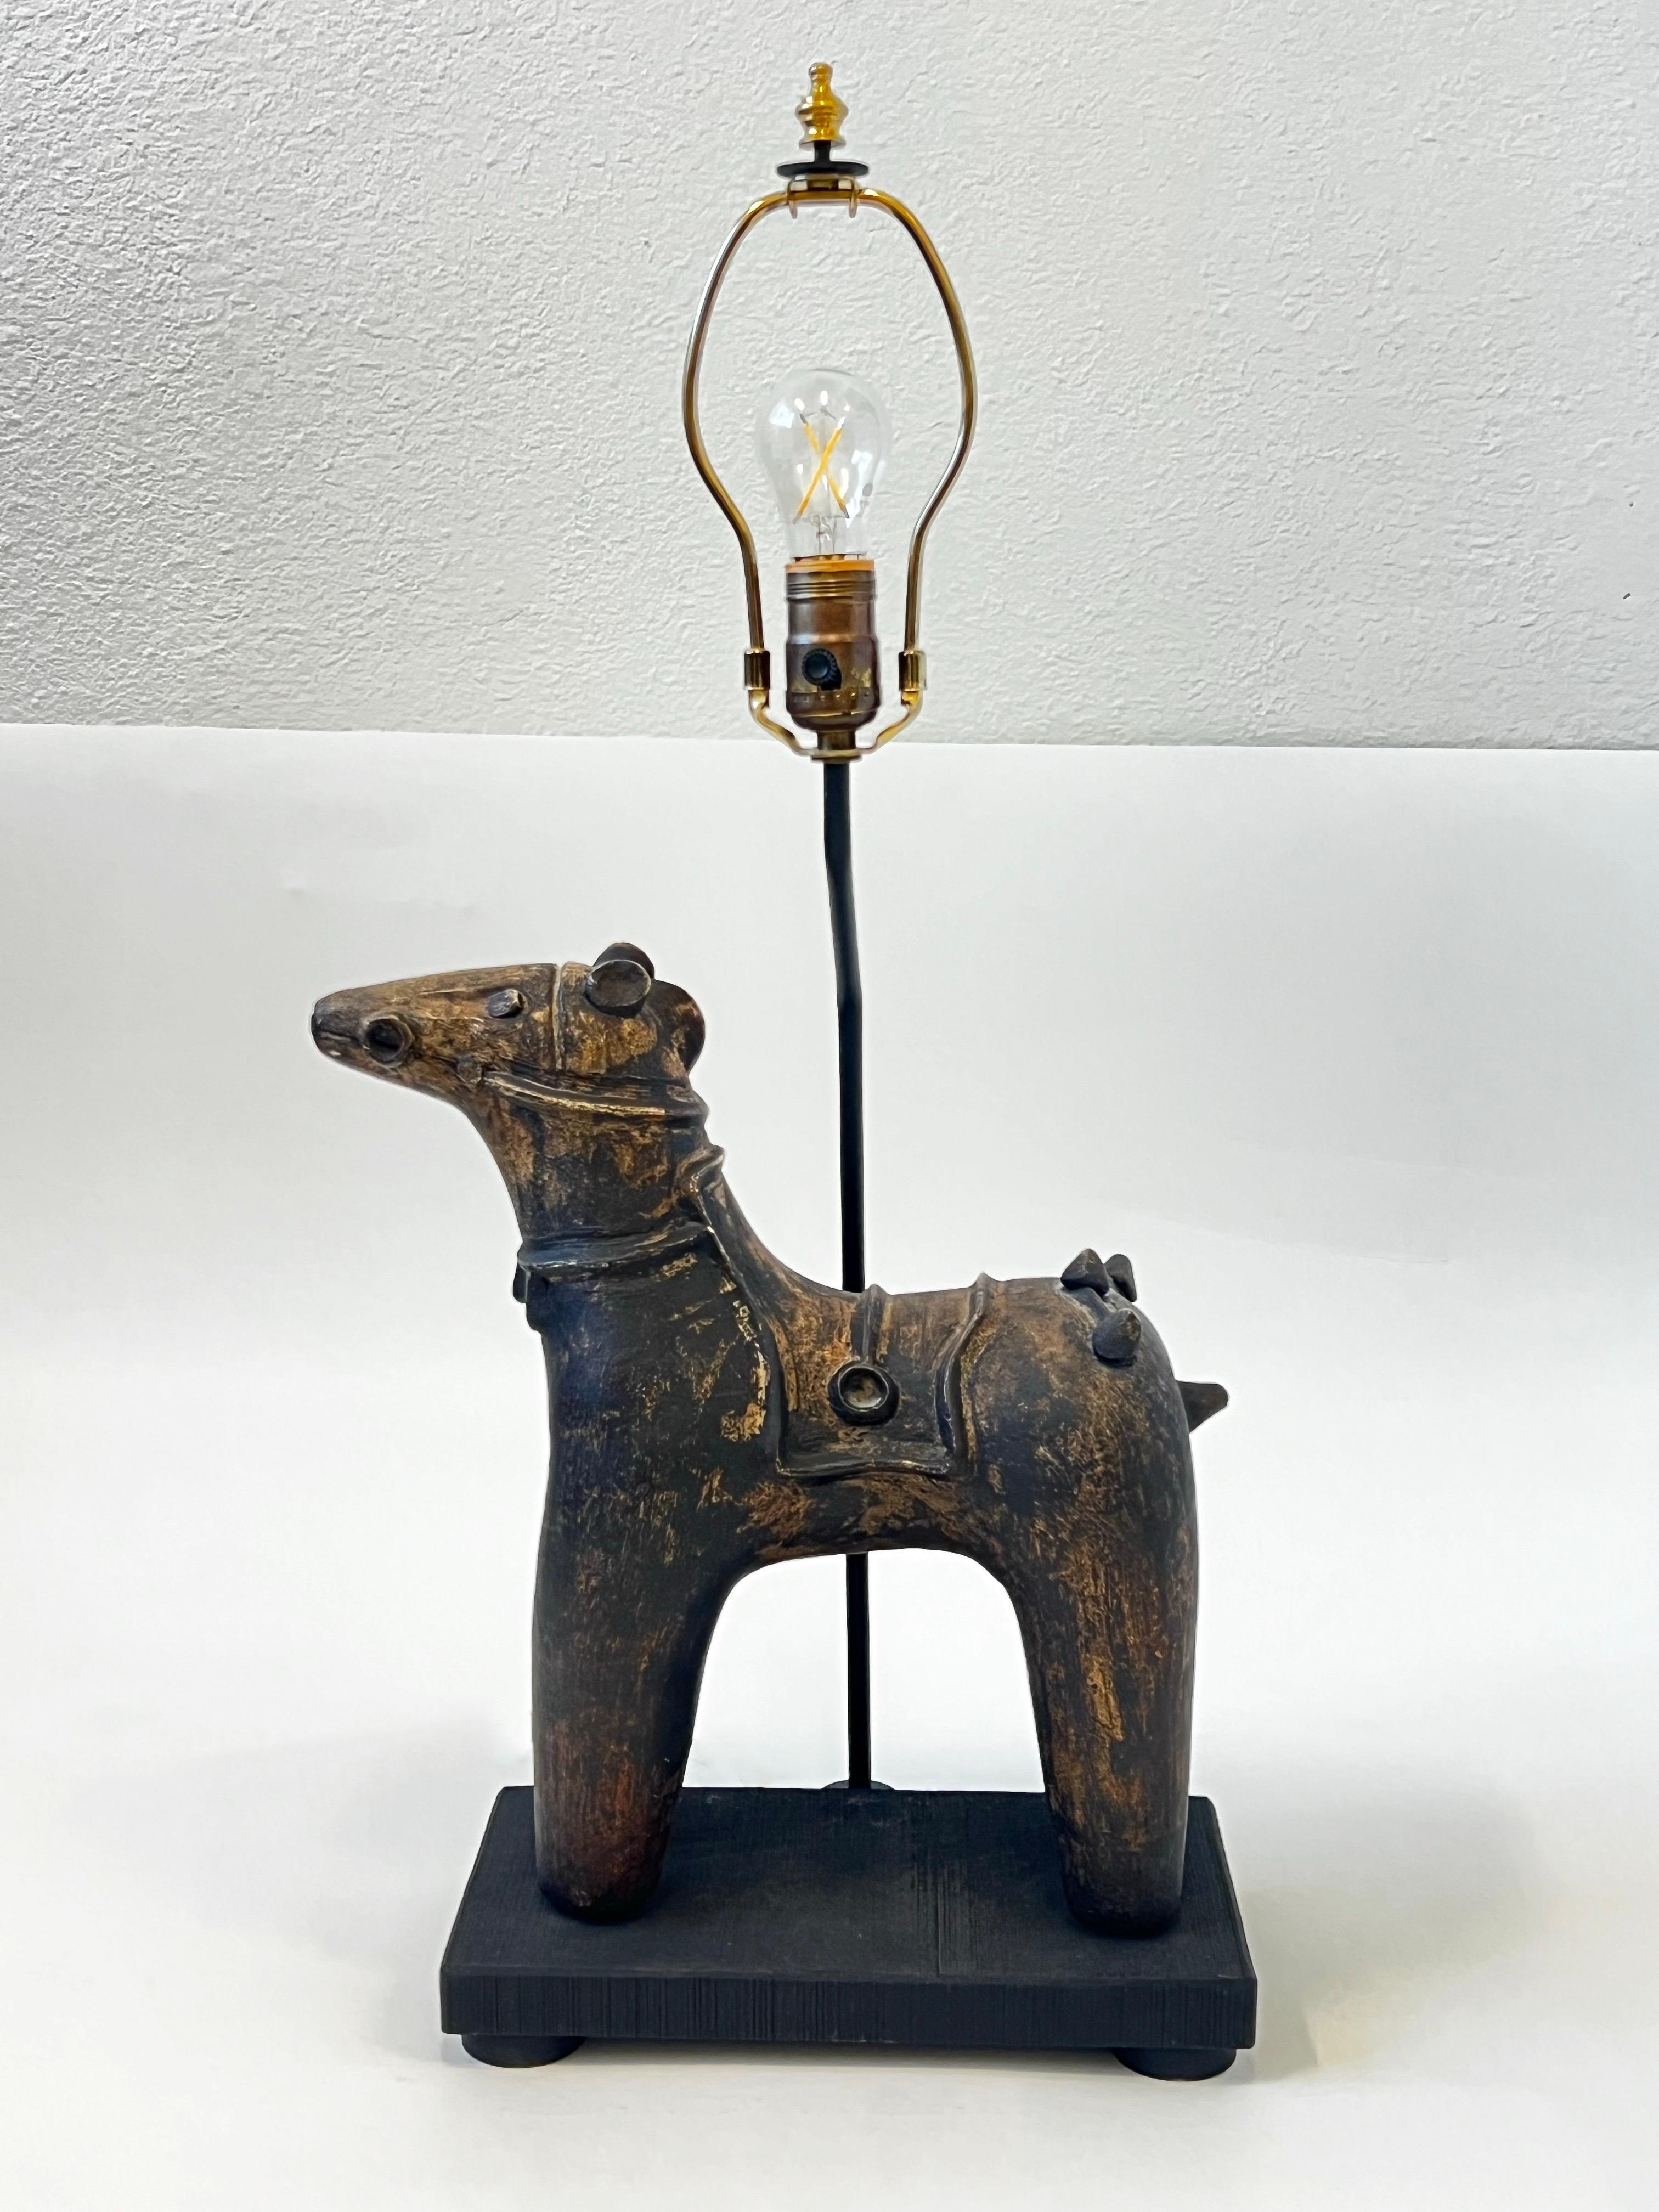 1970’s Ceramic horse table lamp by Frederick Cooper Lamps. In beautiful vintage condition.
The 3 way socket was replaced. It takes one 150 max edition bulb. 

Measurements:
13” Wide, 7” Deep, 26.5” High.
Shade is  20” by 20”